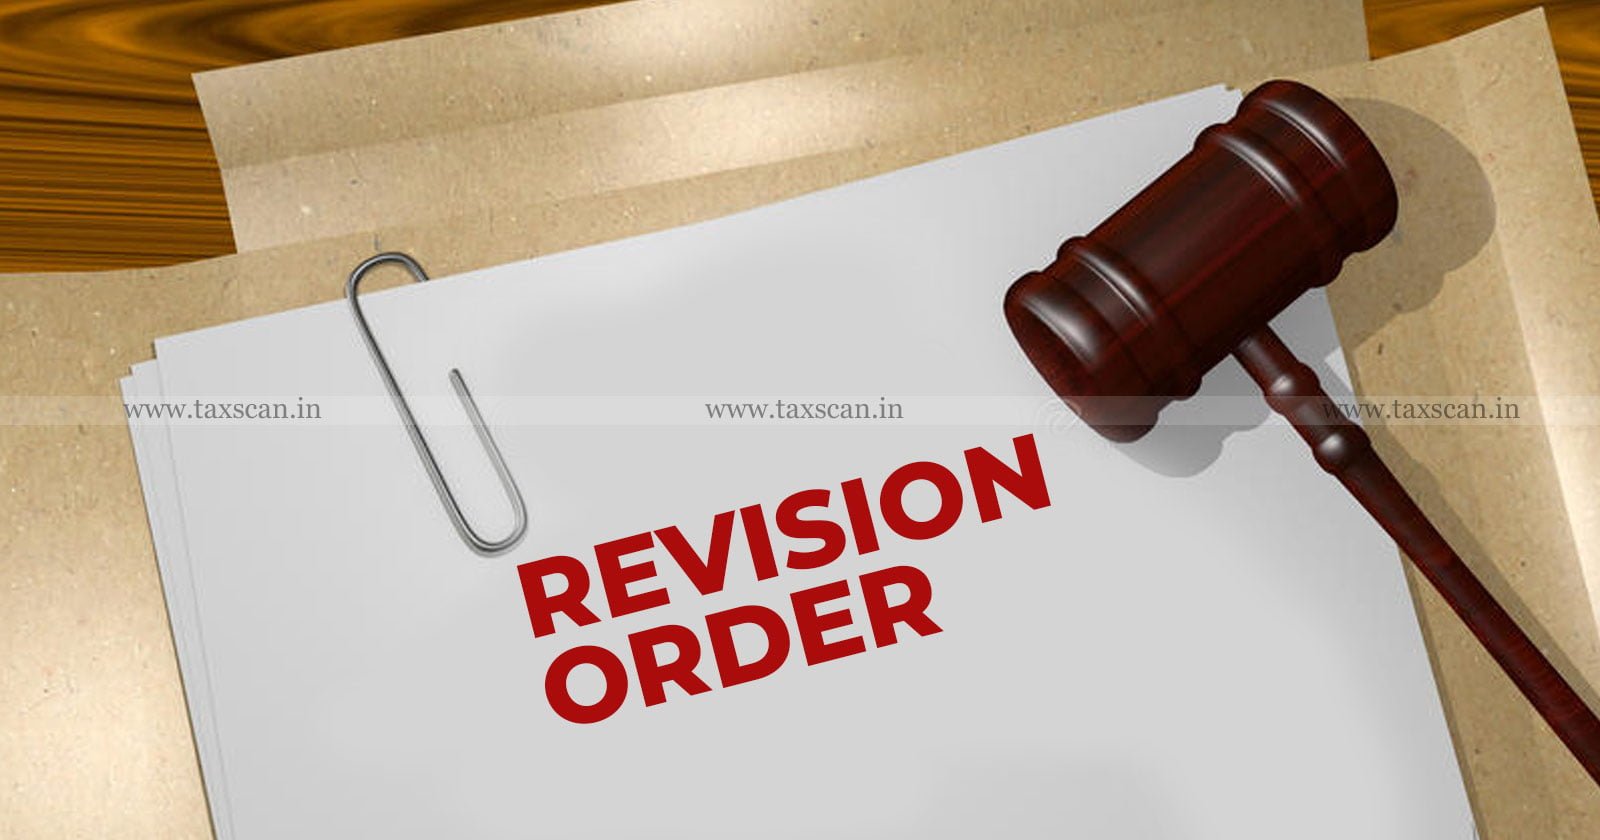 AO - Applying - Rate - of - Tax - as - per - Amended - Law - ITAT - Revision - Order - TAXSCAN